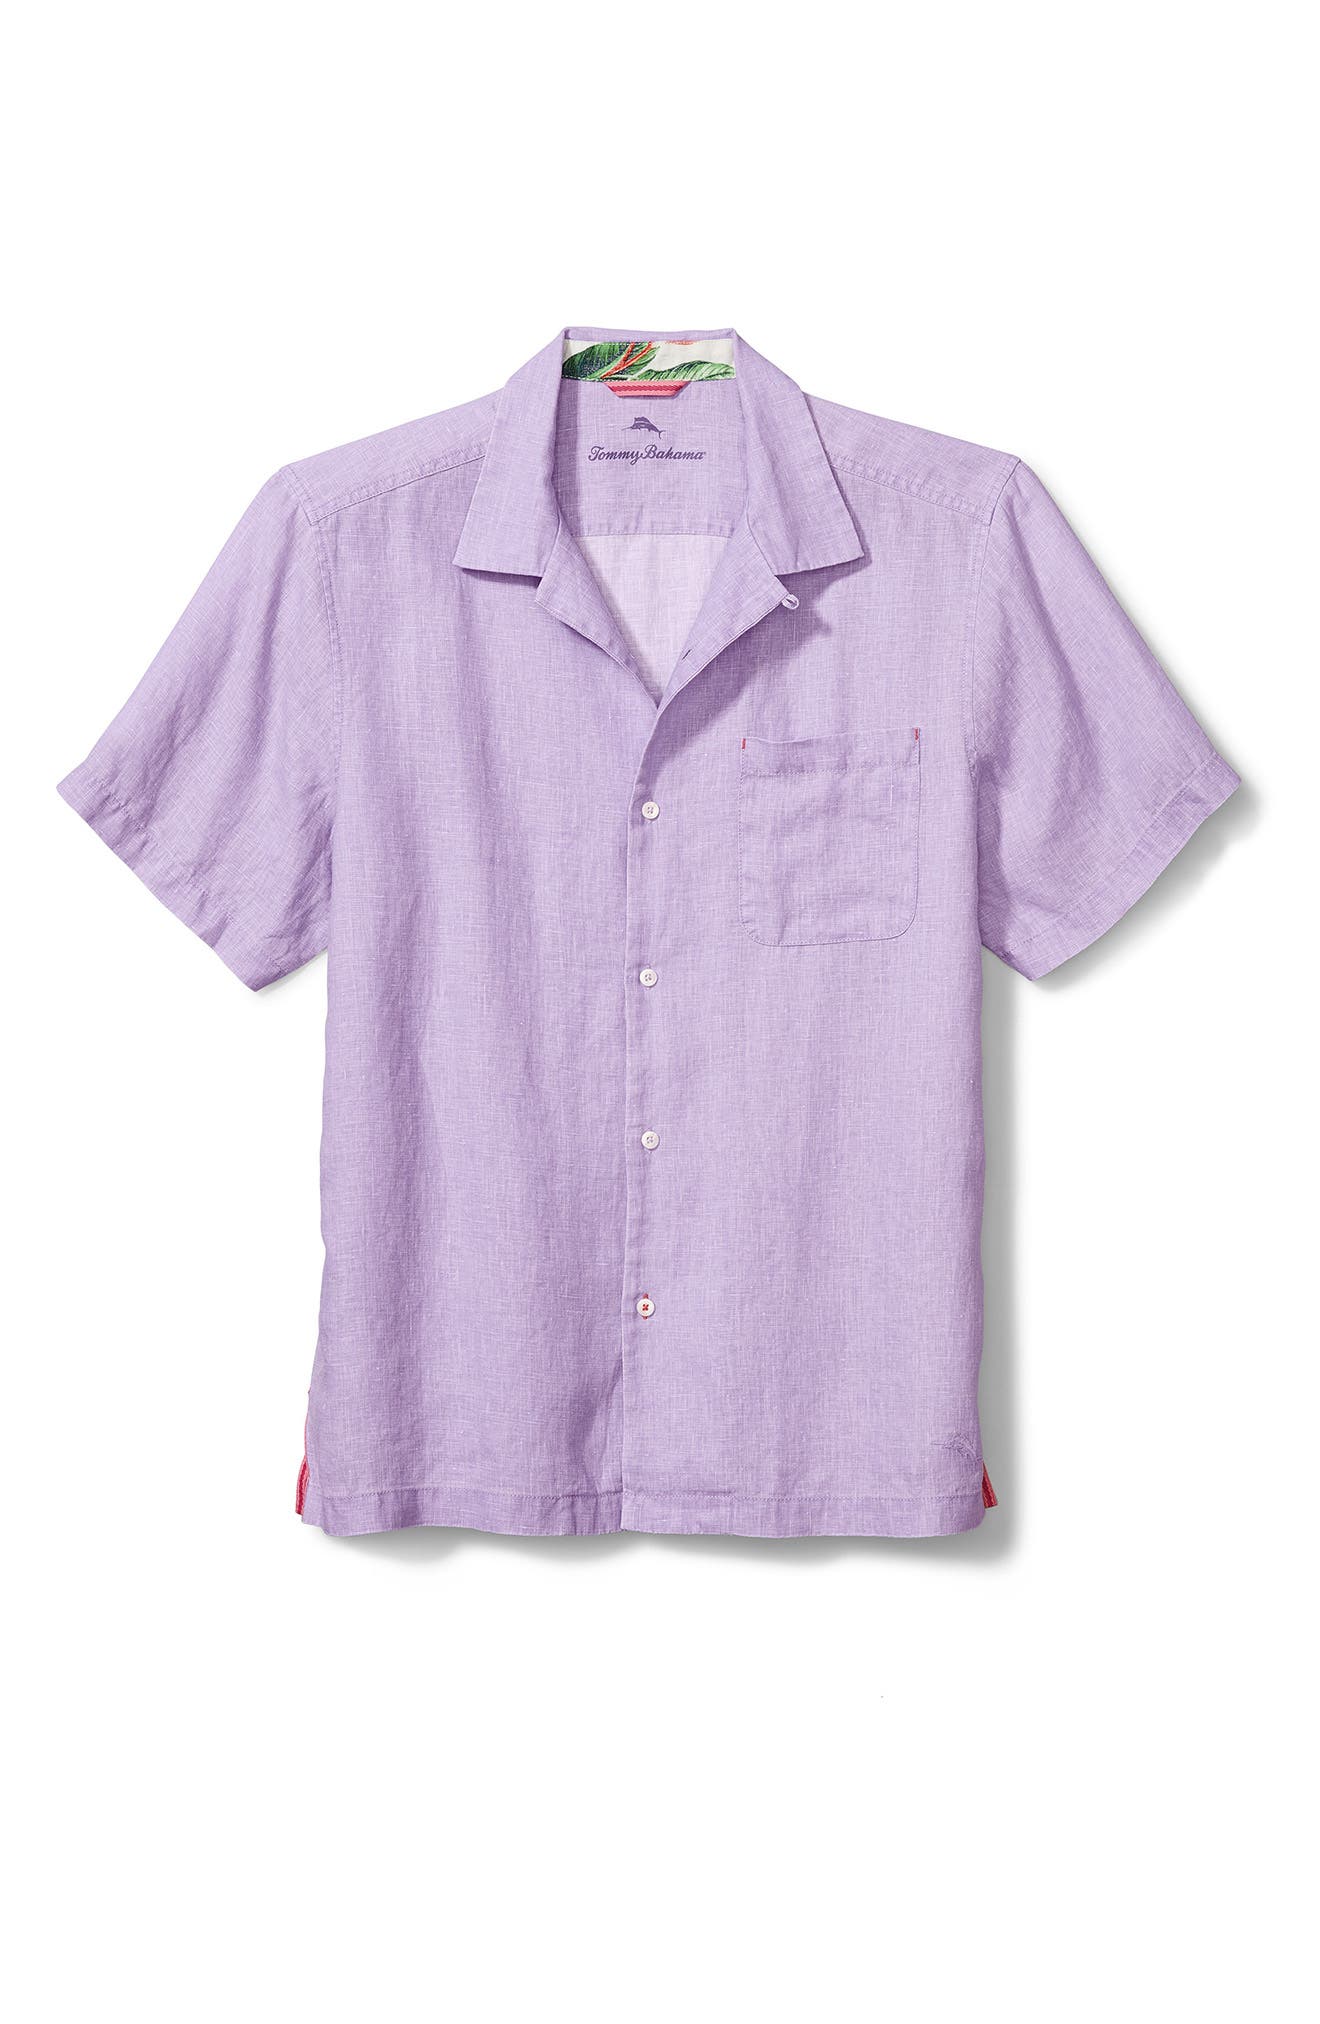 tommy bahama shirts outlet